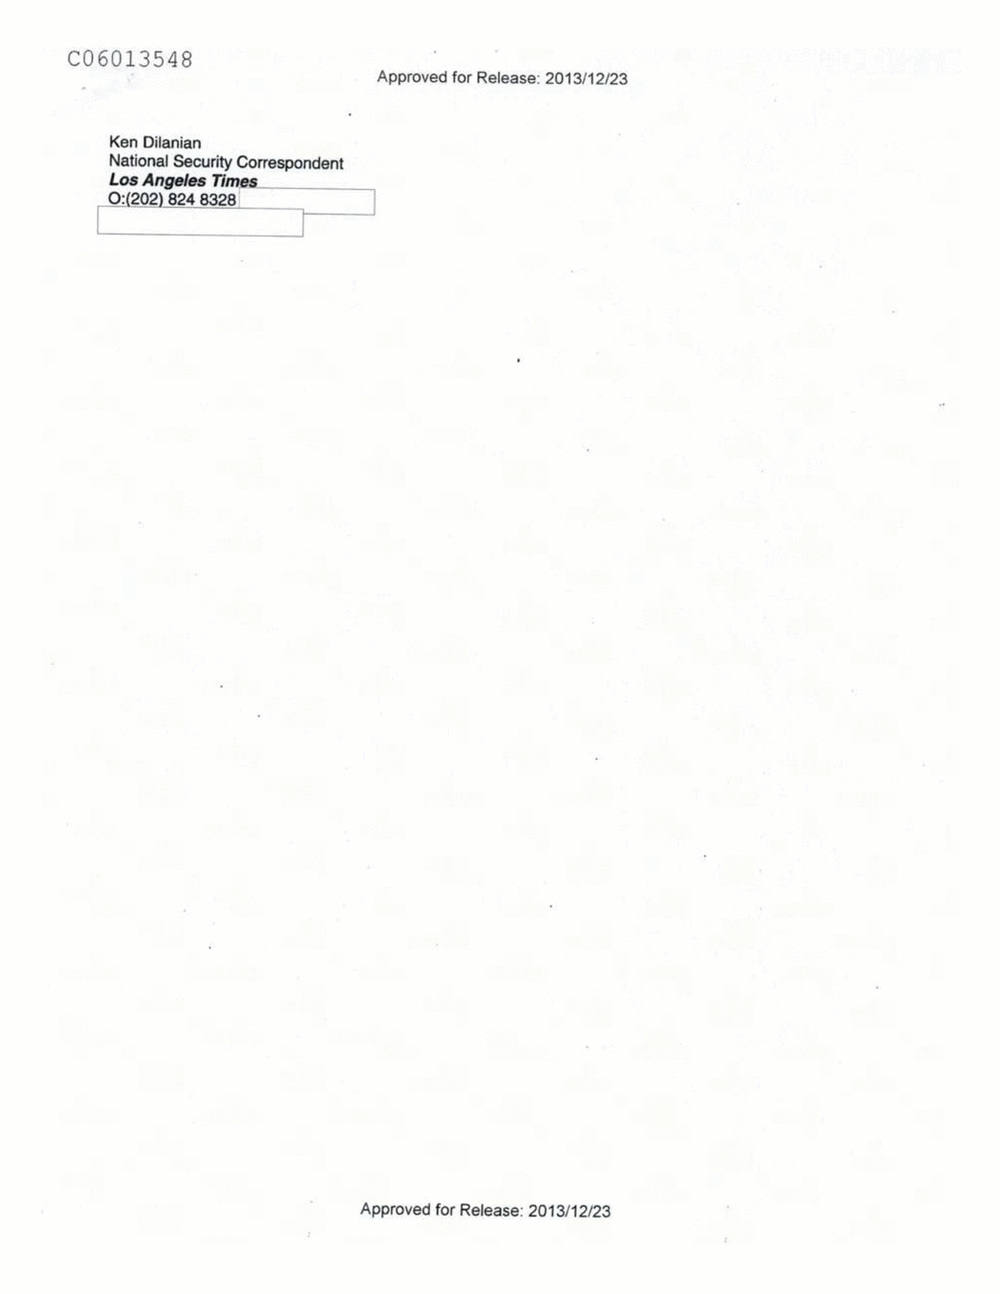 Page 412 from Email Correspondence Between Reporters and CIA Flacks